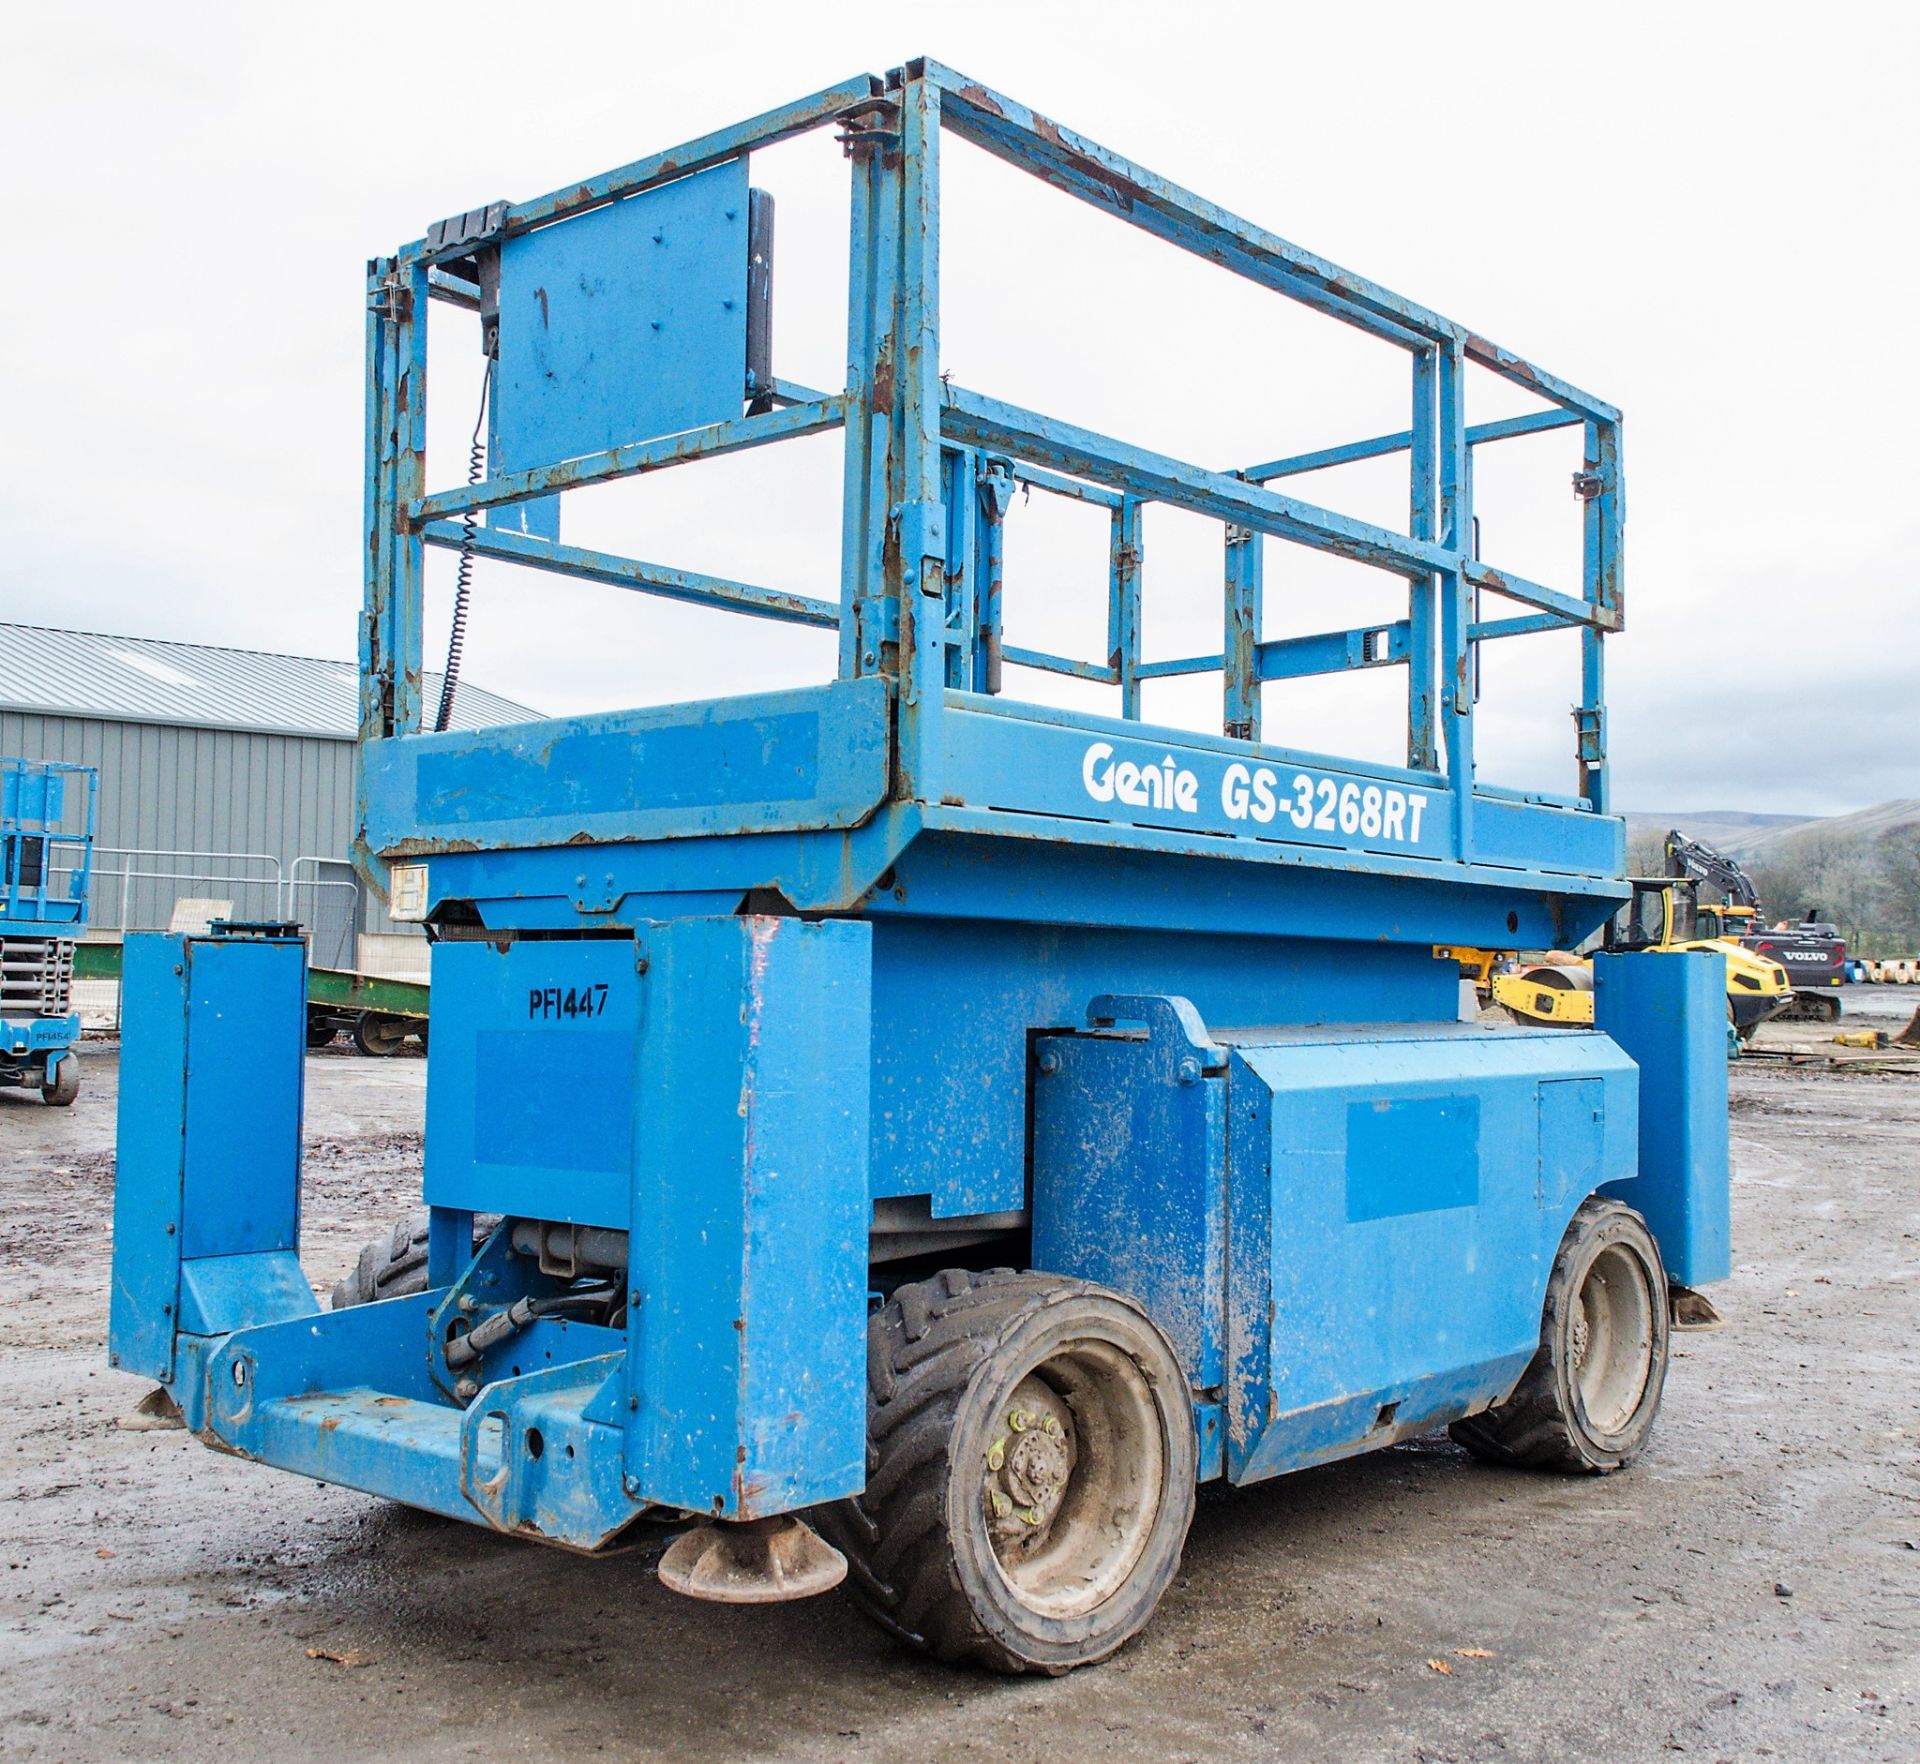 Genie GS3268RT diesel driven rough terrain fork lift truck Year: 2009 S/N: 52720 Recorded Hours: